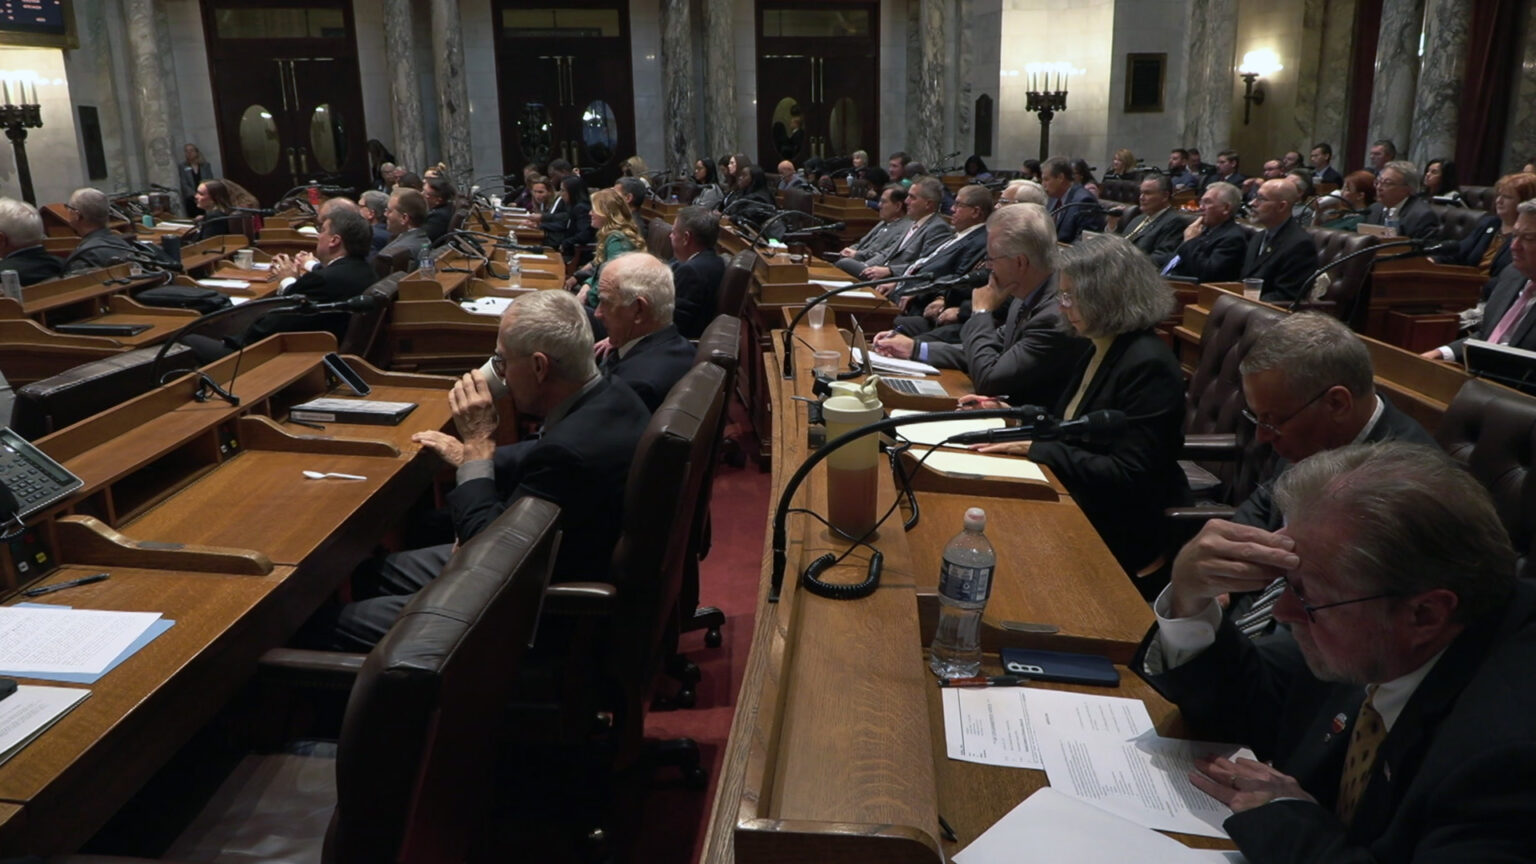 Wisconsin Assembly members sit in high-backed leather chairs on multiple rows of long wood desks arrayed in a semi circle, in a room with marble masonry and double doors with oval windows.